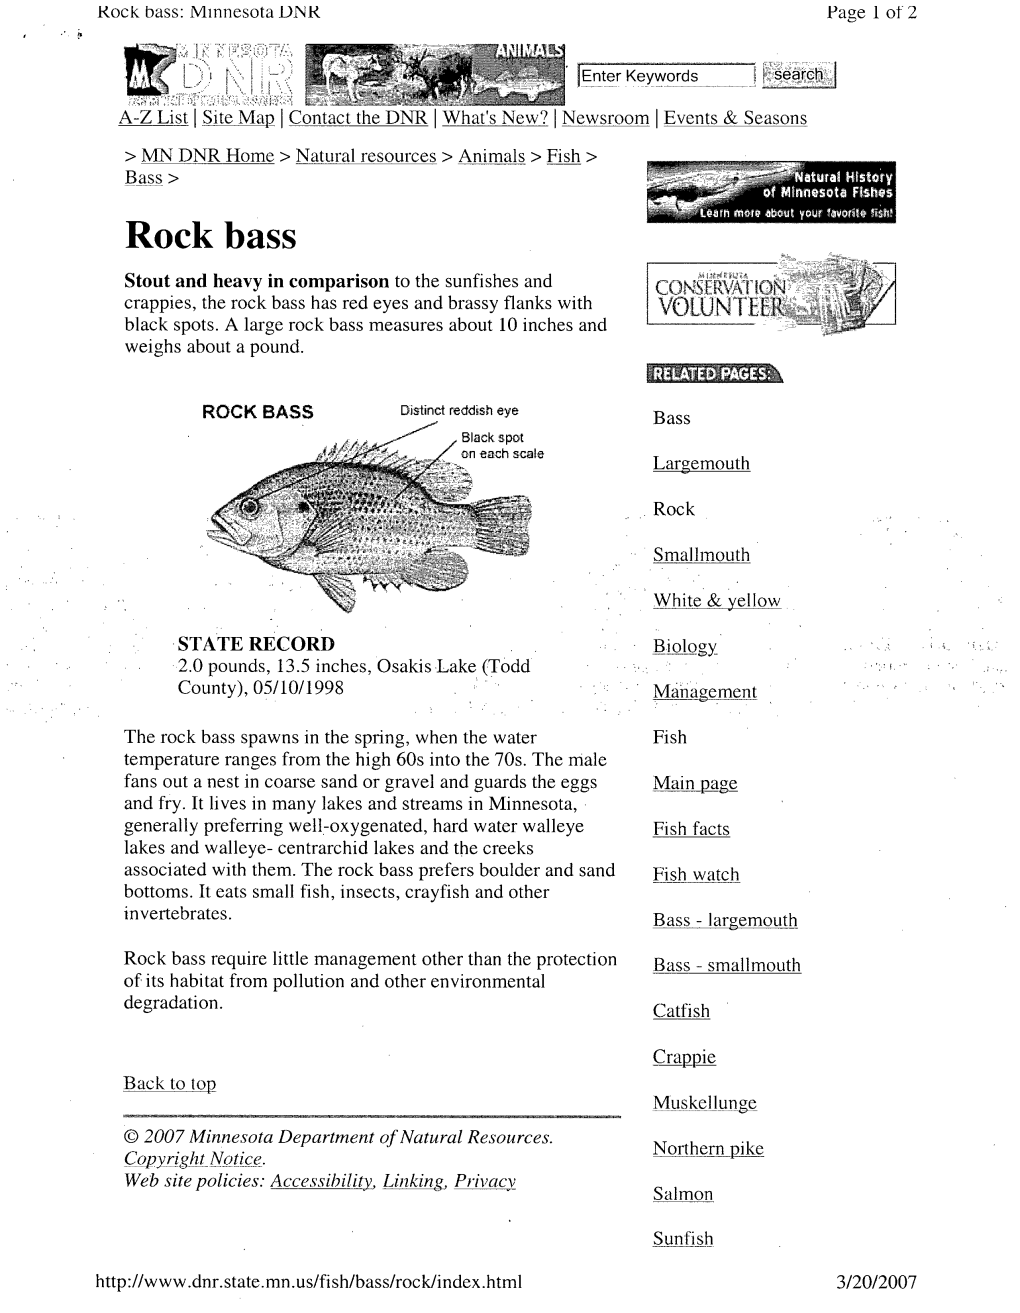 Natural History of Minnesota Fishes: Rock Bass